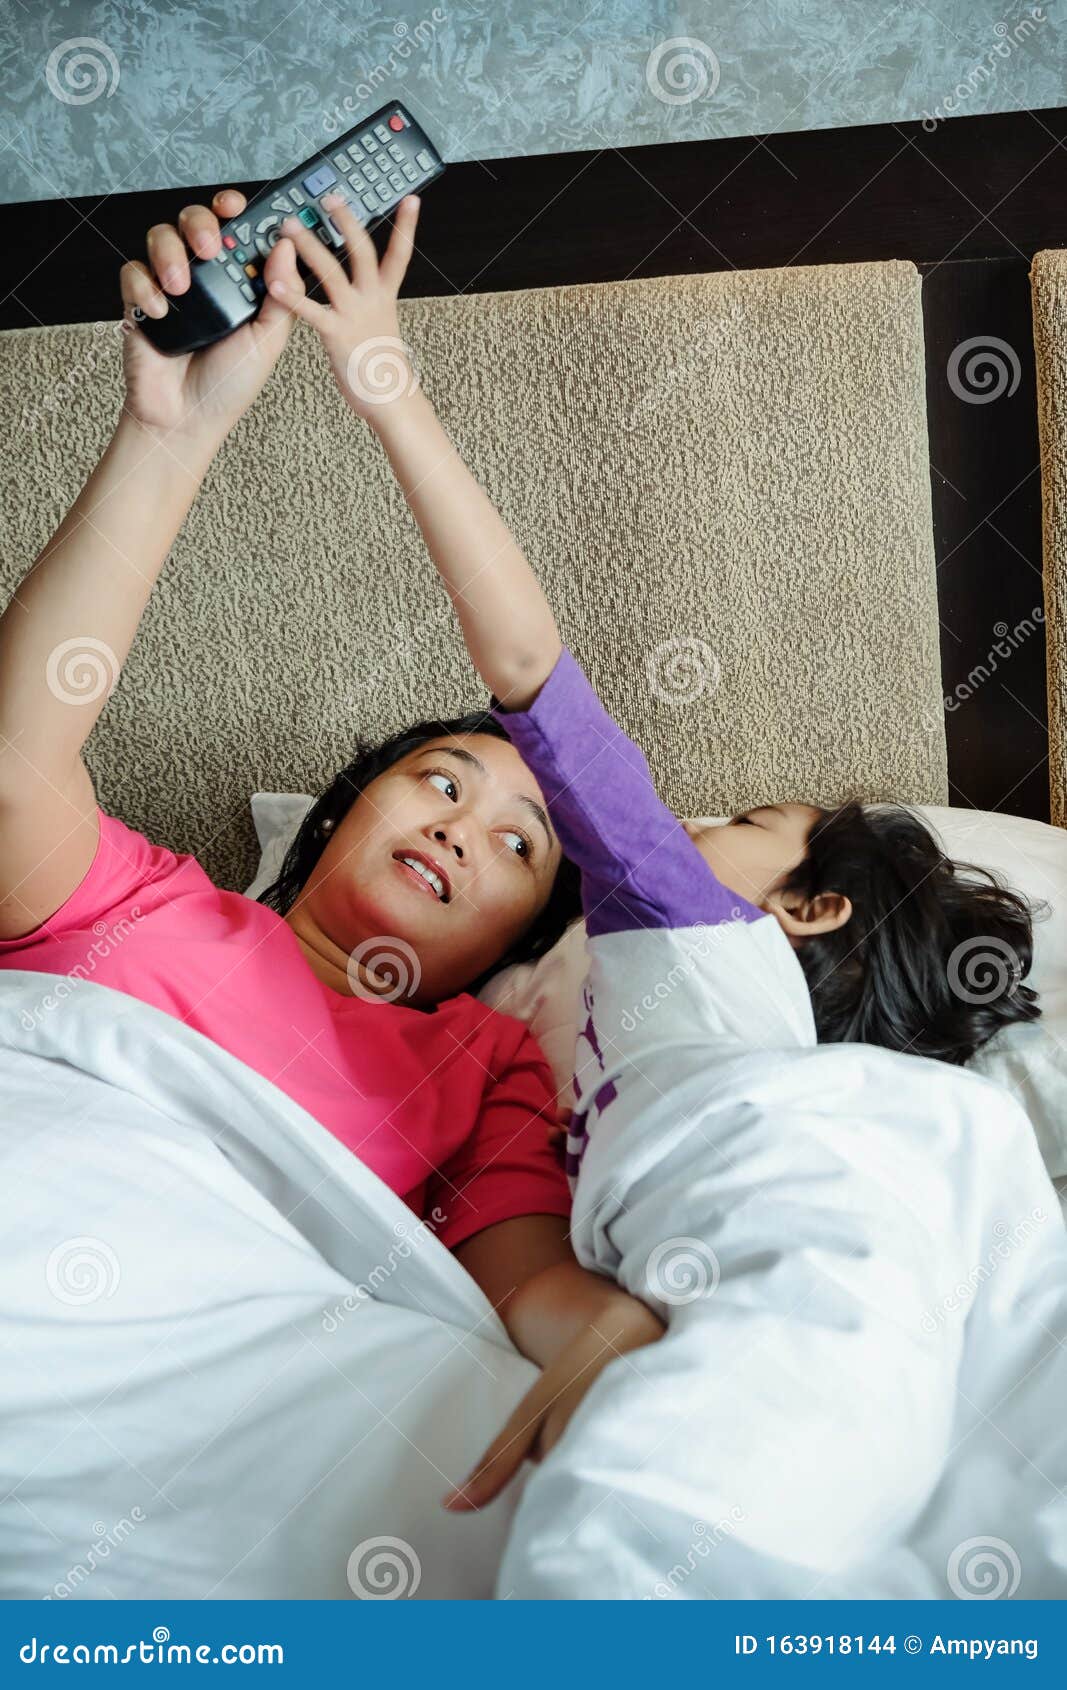 asian child on bed wants to take over television remote control from his mother. parental control